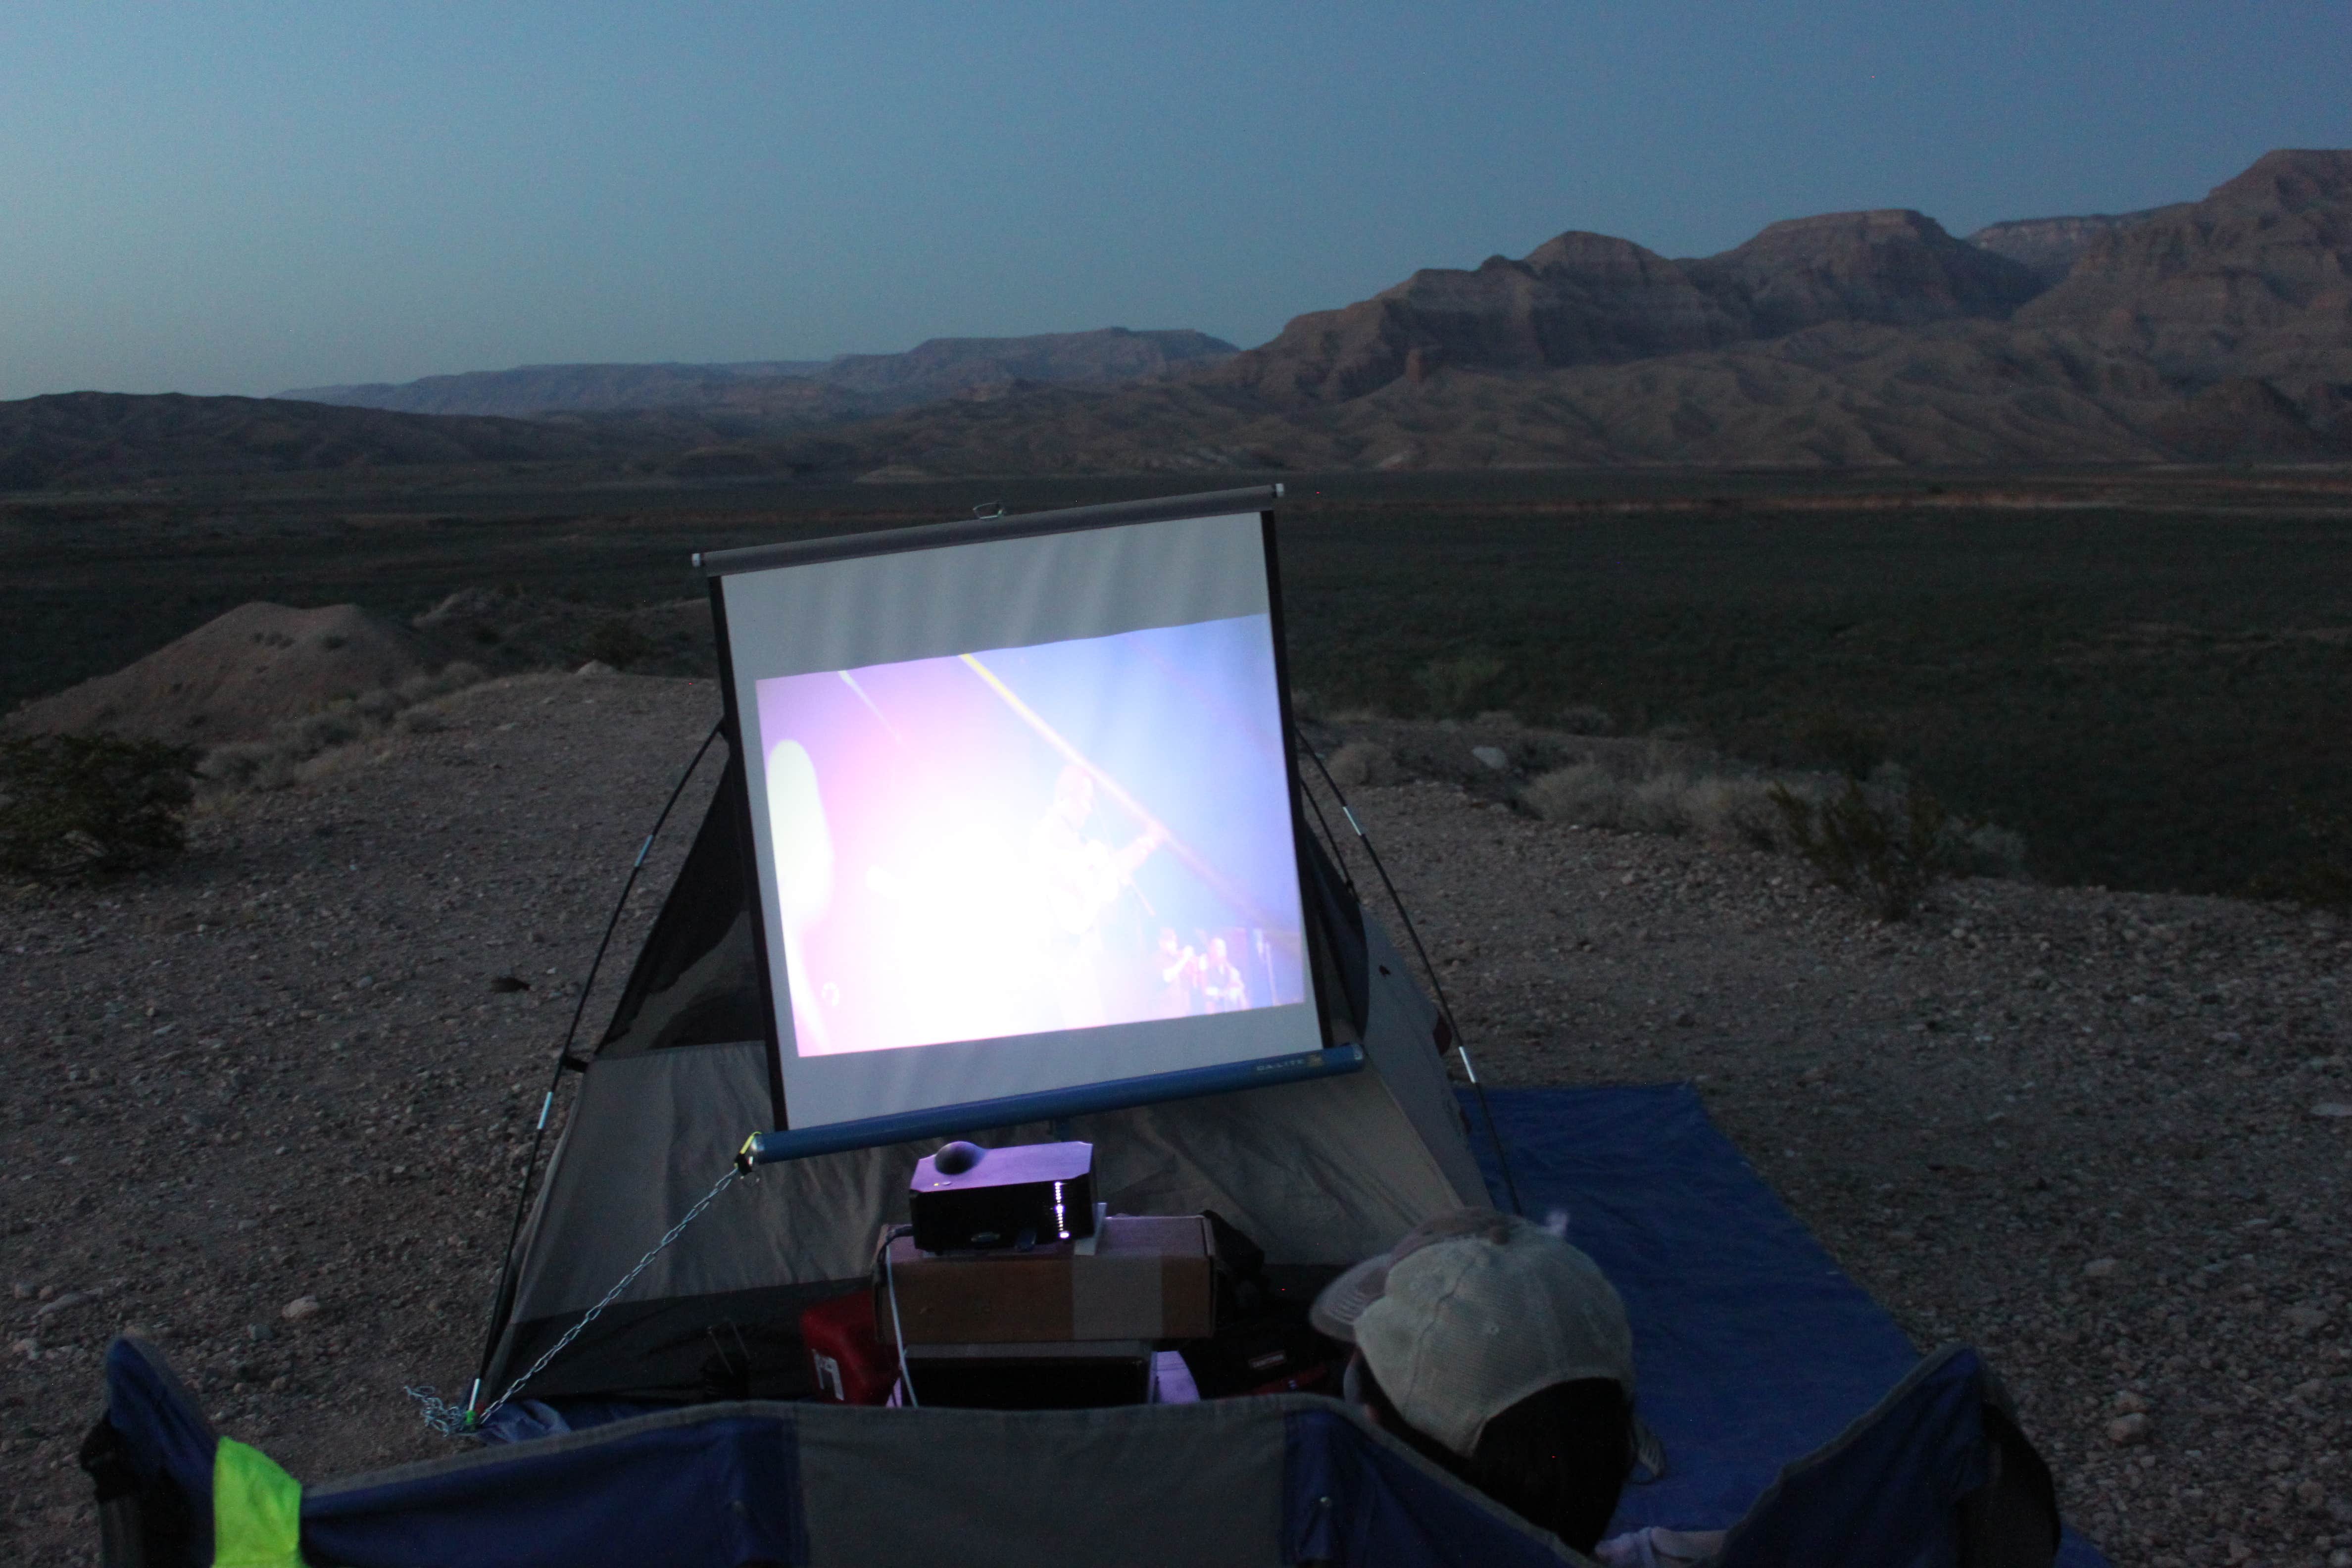 outdoor movie watching with a generator. Before an amazing star-filled sky.